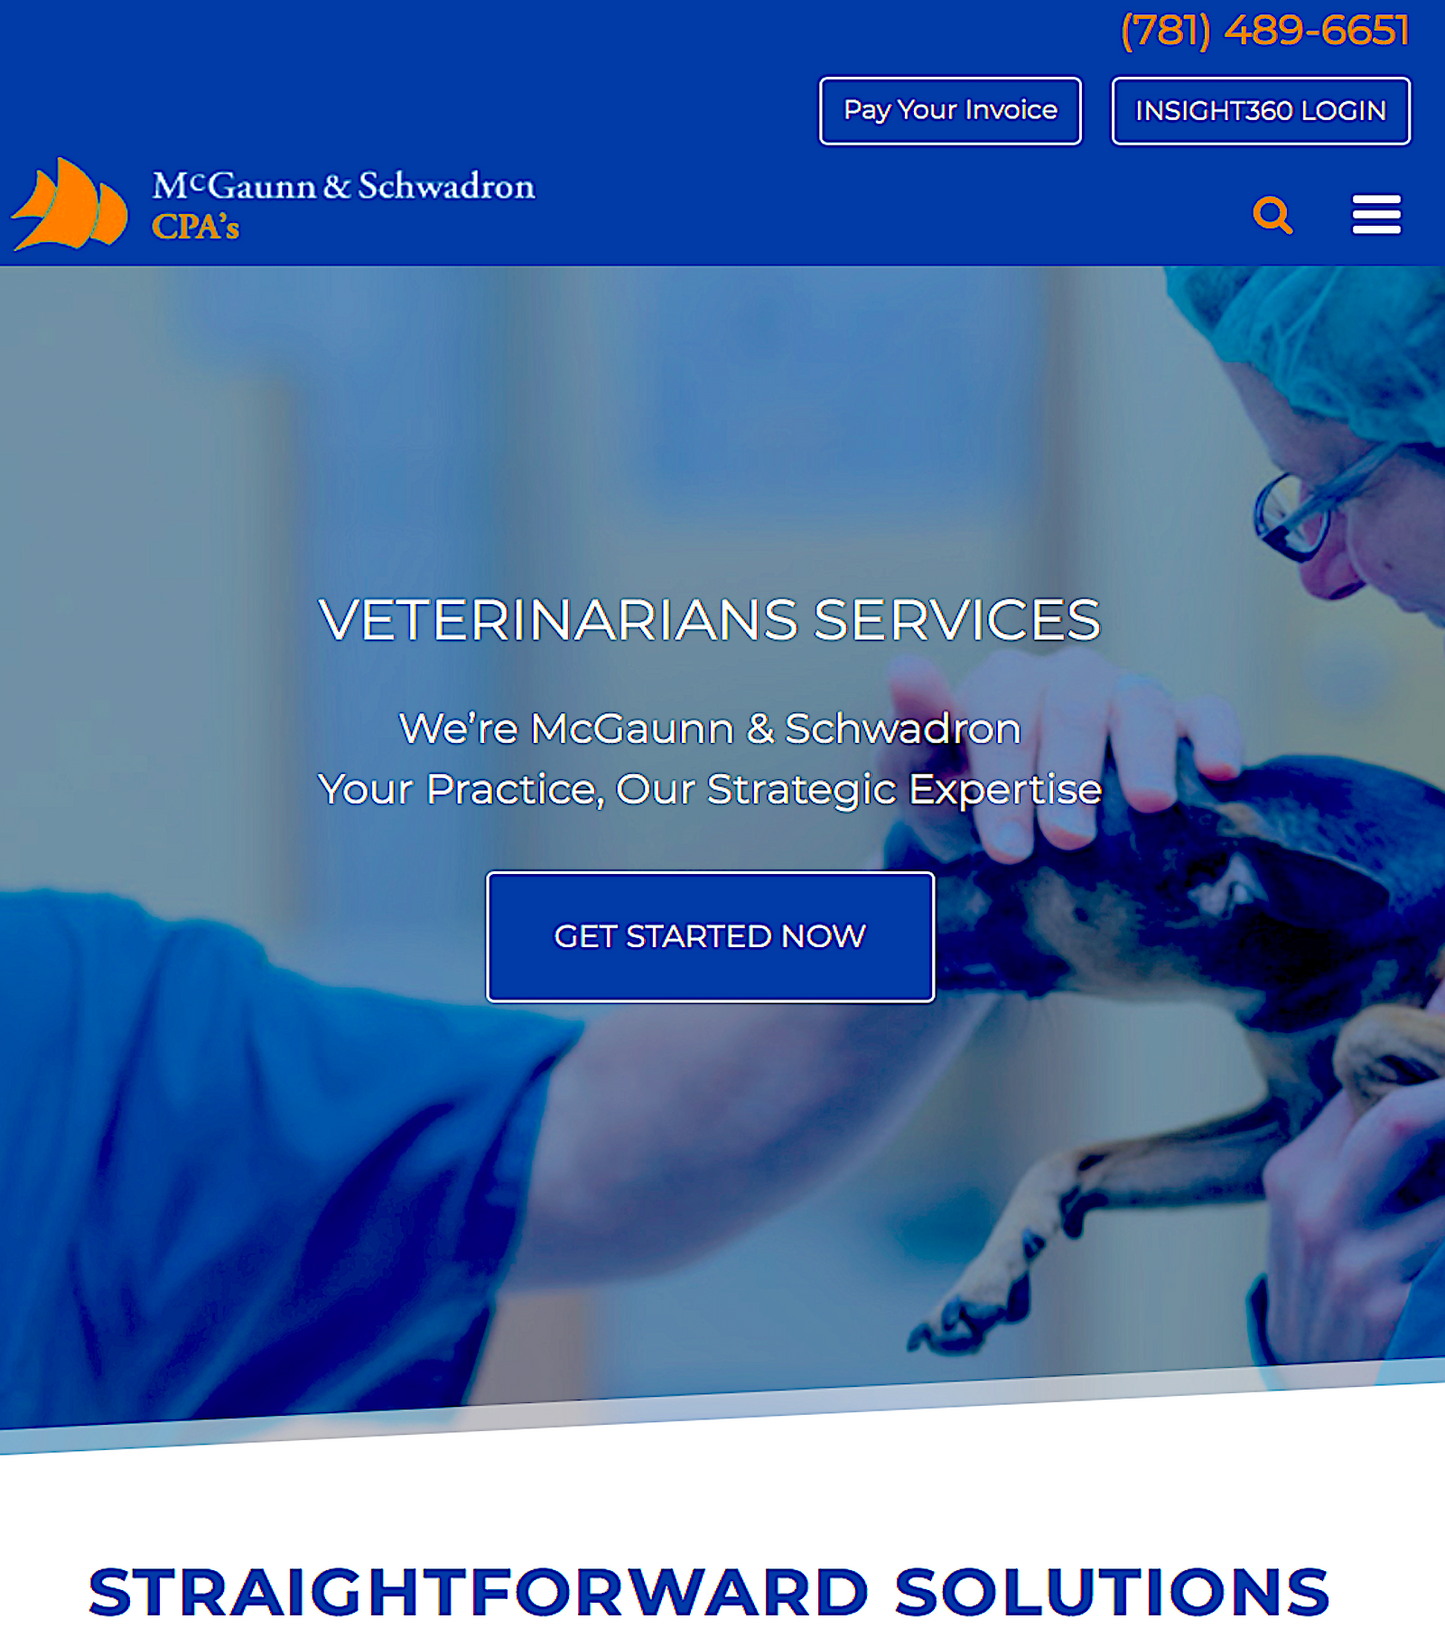 McGAUNN & SCHWADRON: financial services for veterinary practice owners - Vital Vet